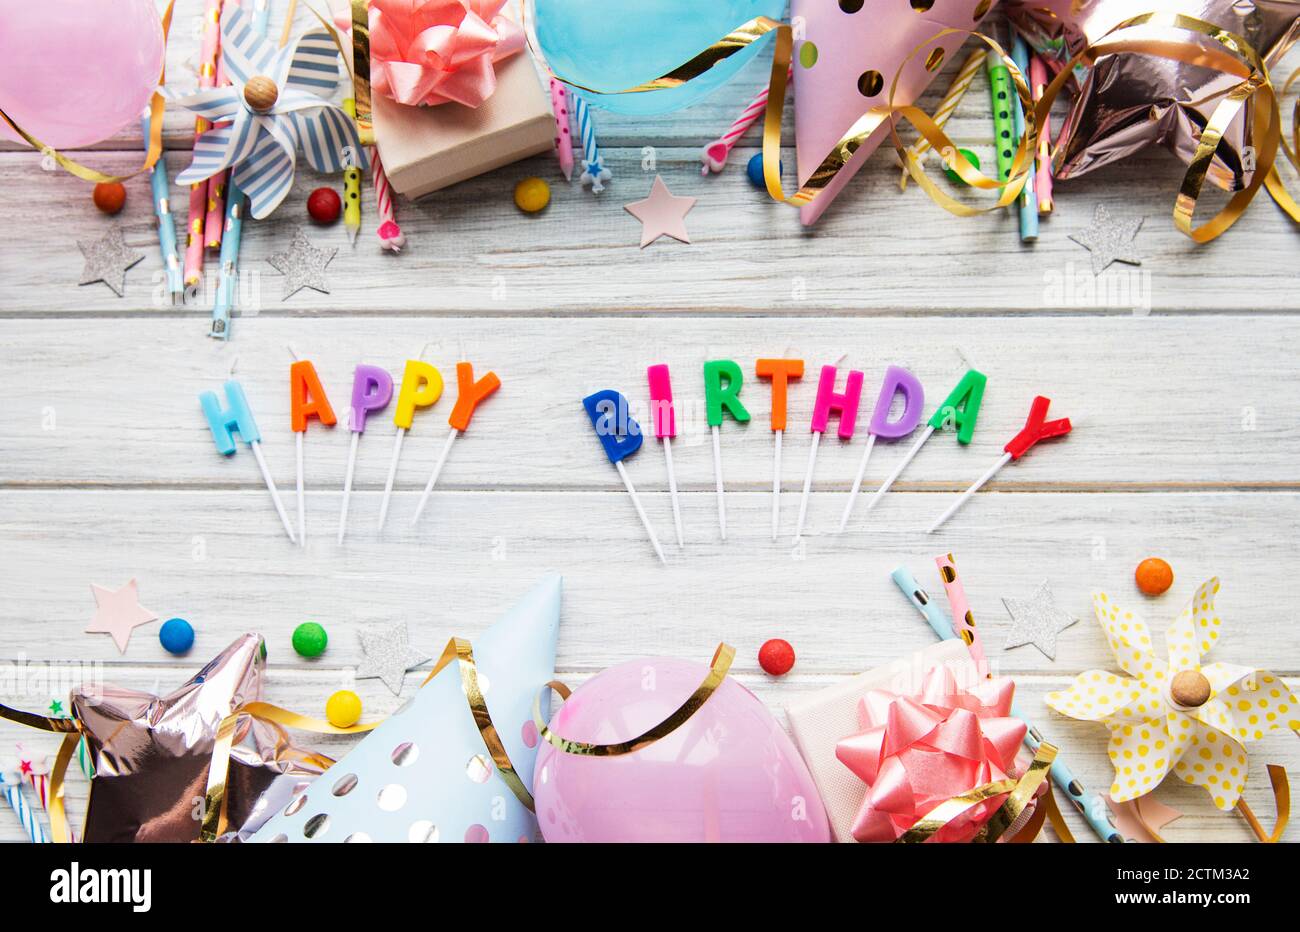 Happy Birthday Text Message On Banque D Image Et Photos Page 8 Alamy